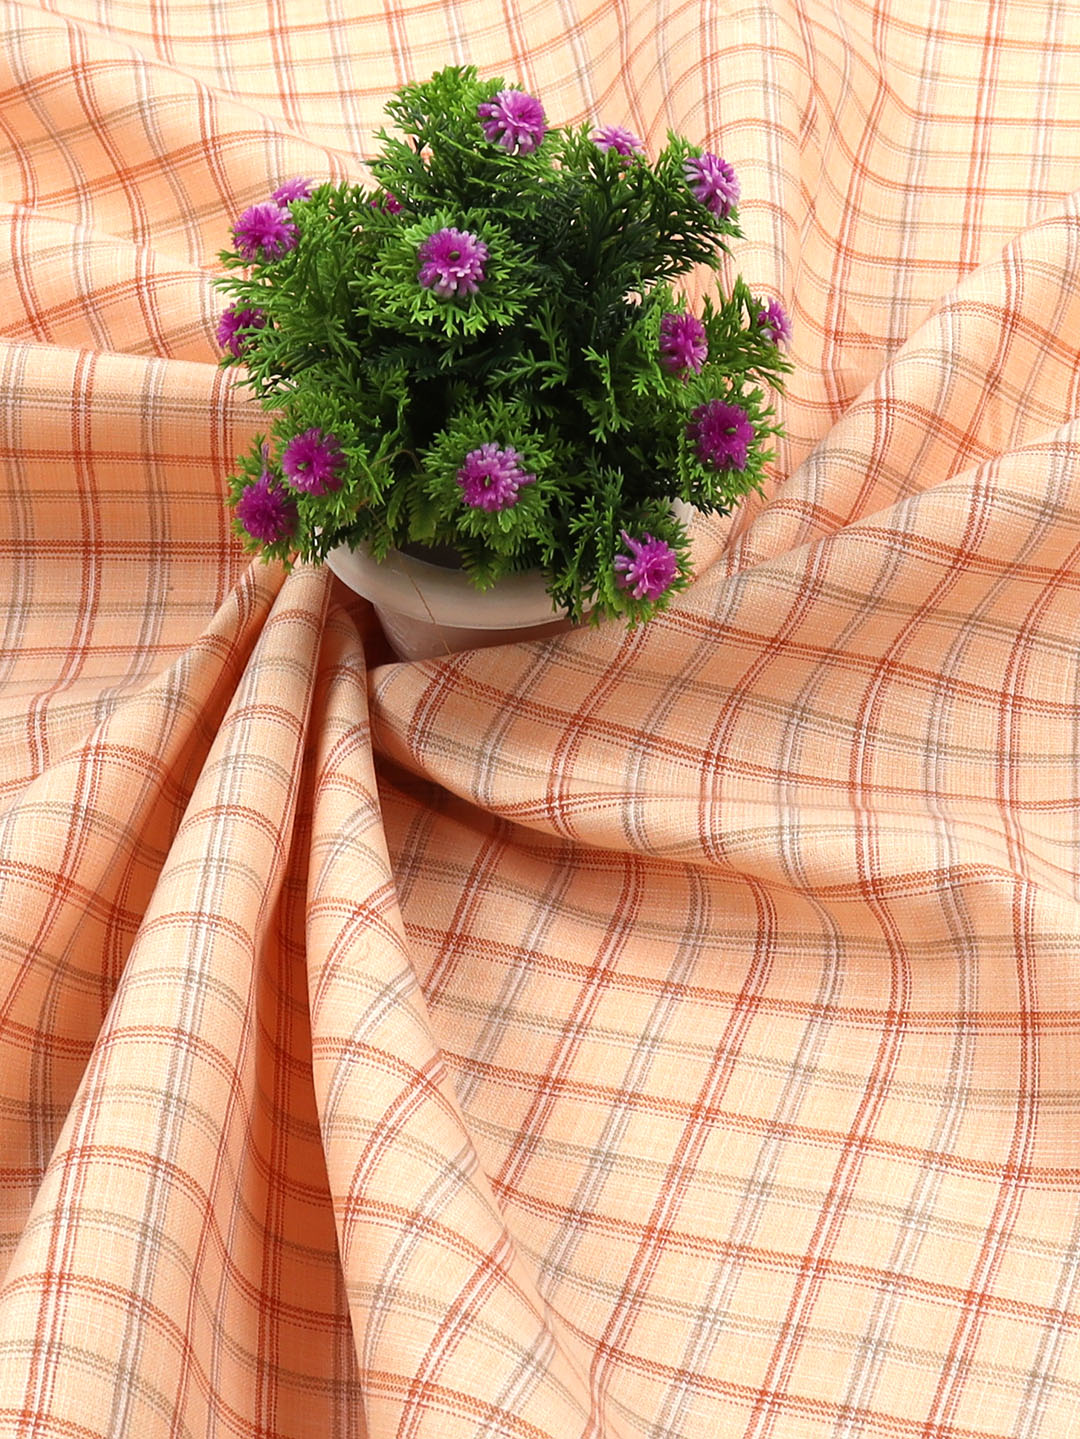 Cotton Colour Checked Orange & Maroon Shirting Fabric High Style